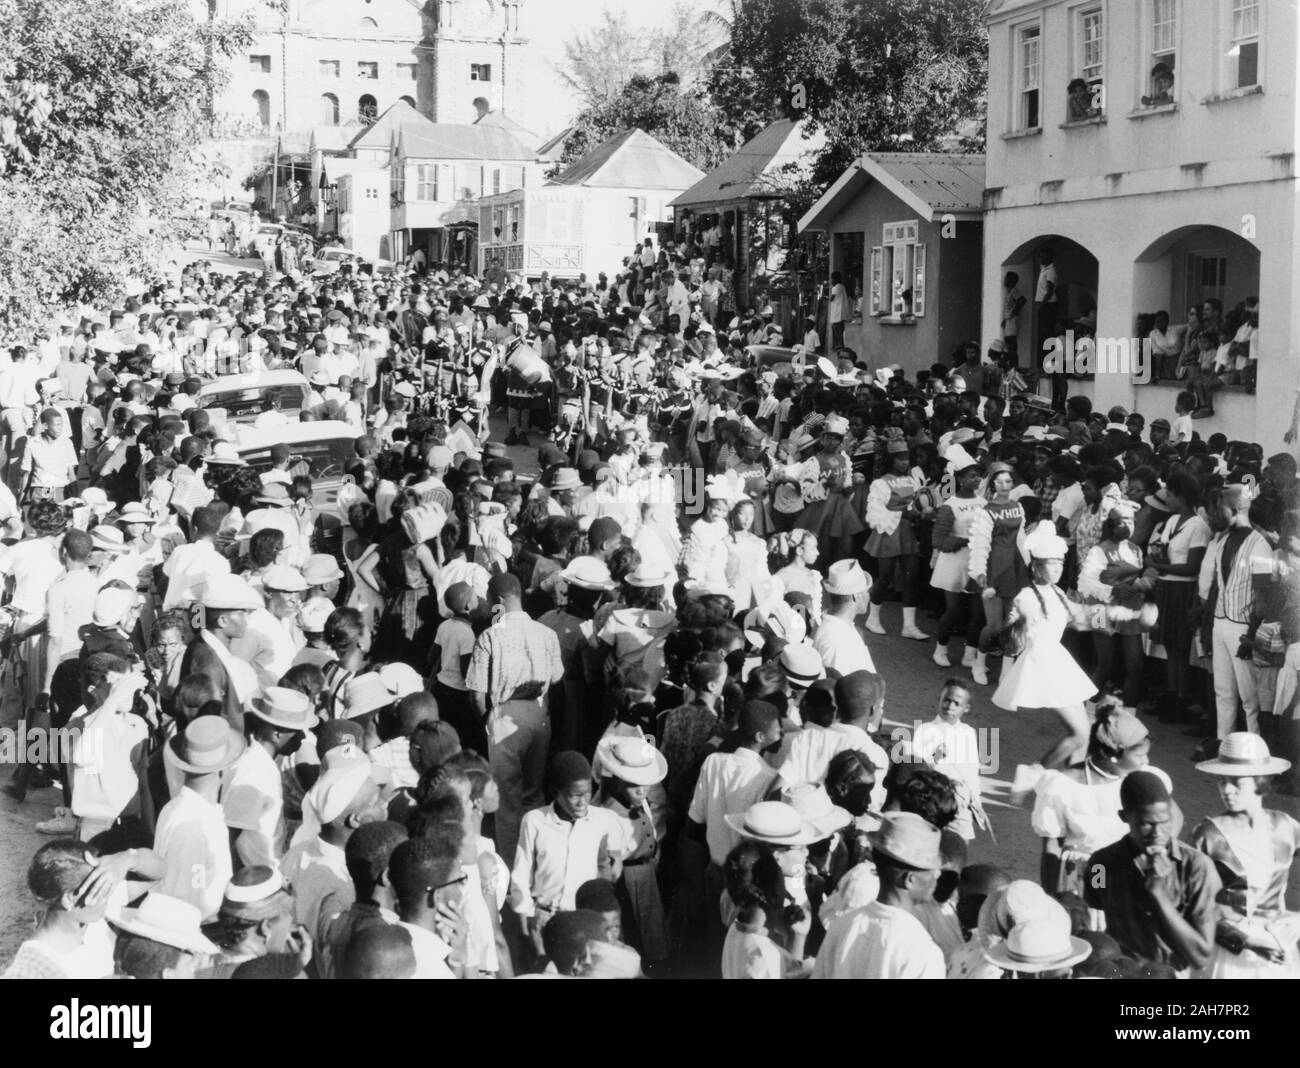 Antigua, Carnival procession in St John'sCrowds pack the main street in St John’s during a carnival procession through the centre of town. St John's Cathedral is just visible in the distance. St Johns, Antigua, 1965, 1965. 2005/010/1/13/25. Stock Photo